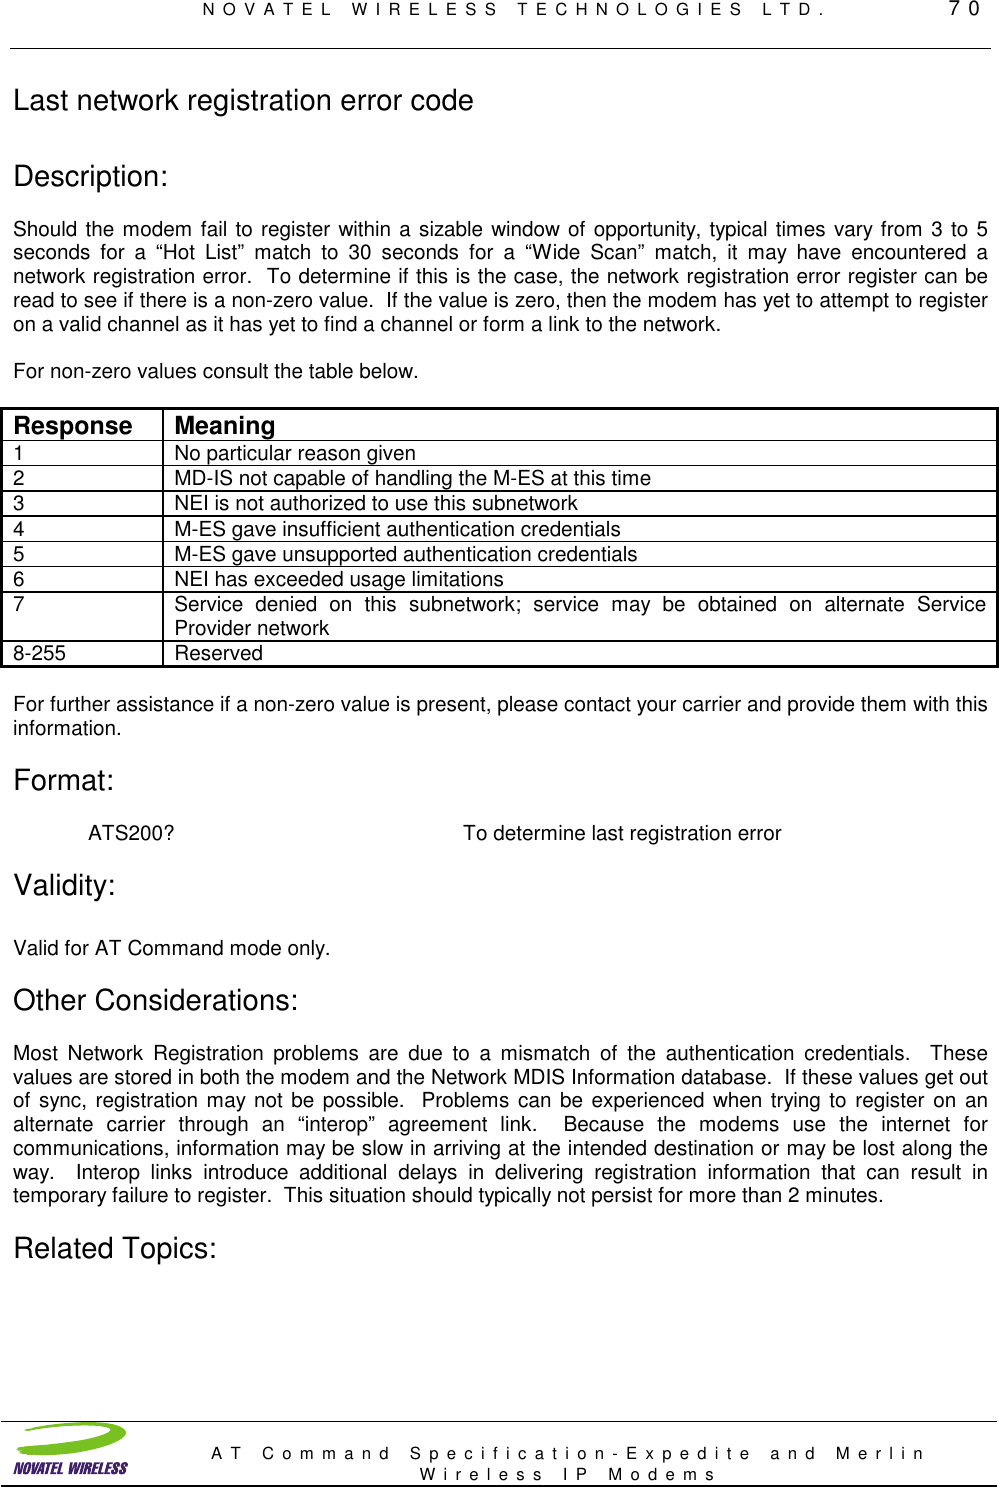 NOVATEL WIRELESS TECHNOLOGIES LTD.         70AT Command Specification-Expedite and MerlinWireless IP ModemsLast network registration error codeDescription:Should the modem fail to register within a sizable window of opportunity, typical times vary from 3 to 5seconds for a “Hot List” match to 30 seconds for a “Wide Scan” match, it may have encountered anetwork registration error.  To determine if this is the case, the network registration error register can beread to see if there is a non-zero value.  If the value is zero, then the modem has yet to attempt to registeron a valid channel as it has yet to find a channel or form a link to the network.For non-zero values consult the table below.Response Meaning1 No particular reason given2 MD-IS not capable of handling the M-ES at this time3 NEI is not authorized to use this subnetwork4 M-ES gave insufficient authentication credentials5 M-ES gave unsupported authentication credentials6 NEI has exceeded usage limitations7 Service denied on this subnetwork; service may be obtained on alternate ServiceProvider network8-255 ReservedFor further assistance if a non-zero value is present, please contact your carrier and provide them with thisinformation.Format:ATS200? To determine last registration errorValidity:Valid for AT Command mode only.Other Considerations:Most Network Registration problems are due to a mismatch of the authentication credentials.  Thesevalues are stored in both the modem and the Network MDIS Information database.  If these values get outof sync, registration may not be possible.  Problems can be experienced when trying to register on analternate carrier through an “interop” agreement link.  Because the modems use the internet forcommunications, information may be slow in arriving at the intended destination or may be lost along theway.  Interop links introduce additional delays in delivering registration information that can result intemporary failure to register.  This situation should typically not persist for more than 2 minutes.Related Topics: